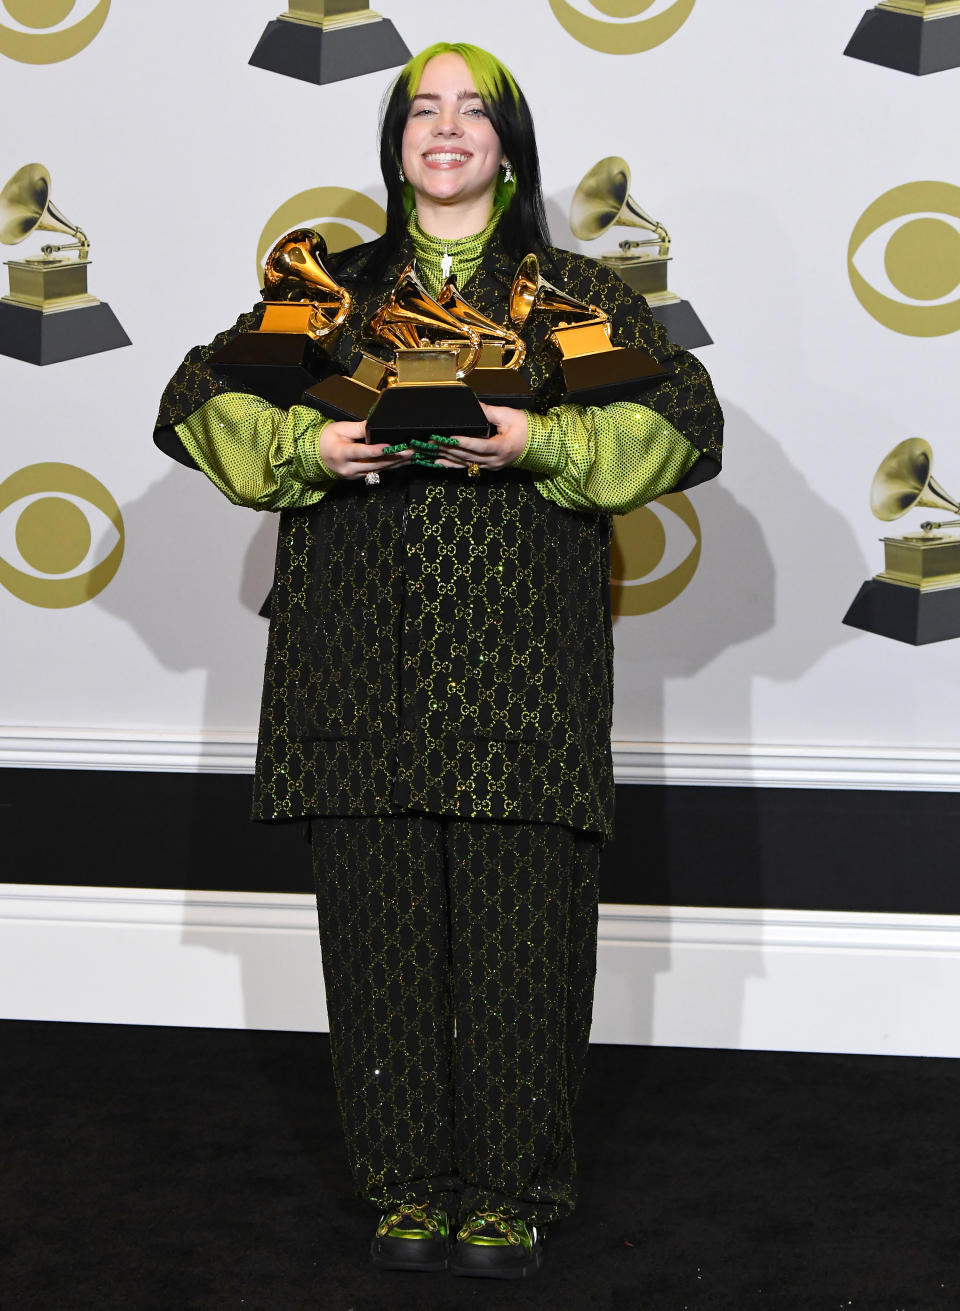 Billie Eilish poses at the 62nd Annual GRAMMY Awards at Staples Center on January 26, 2020